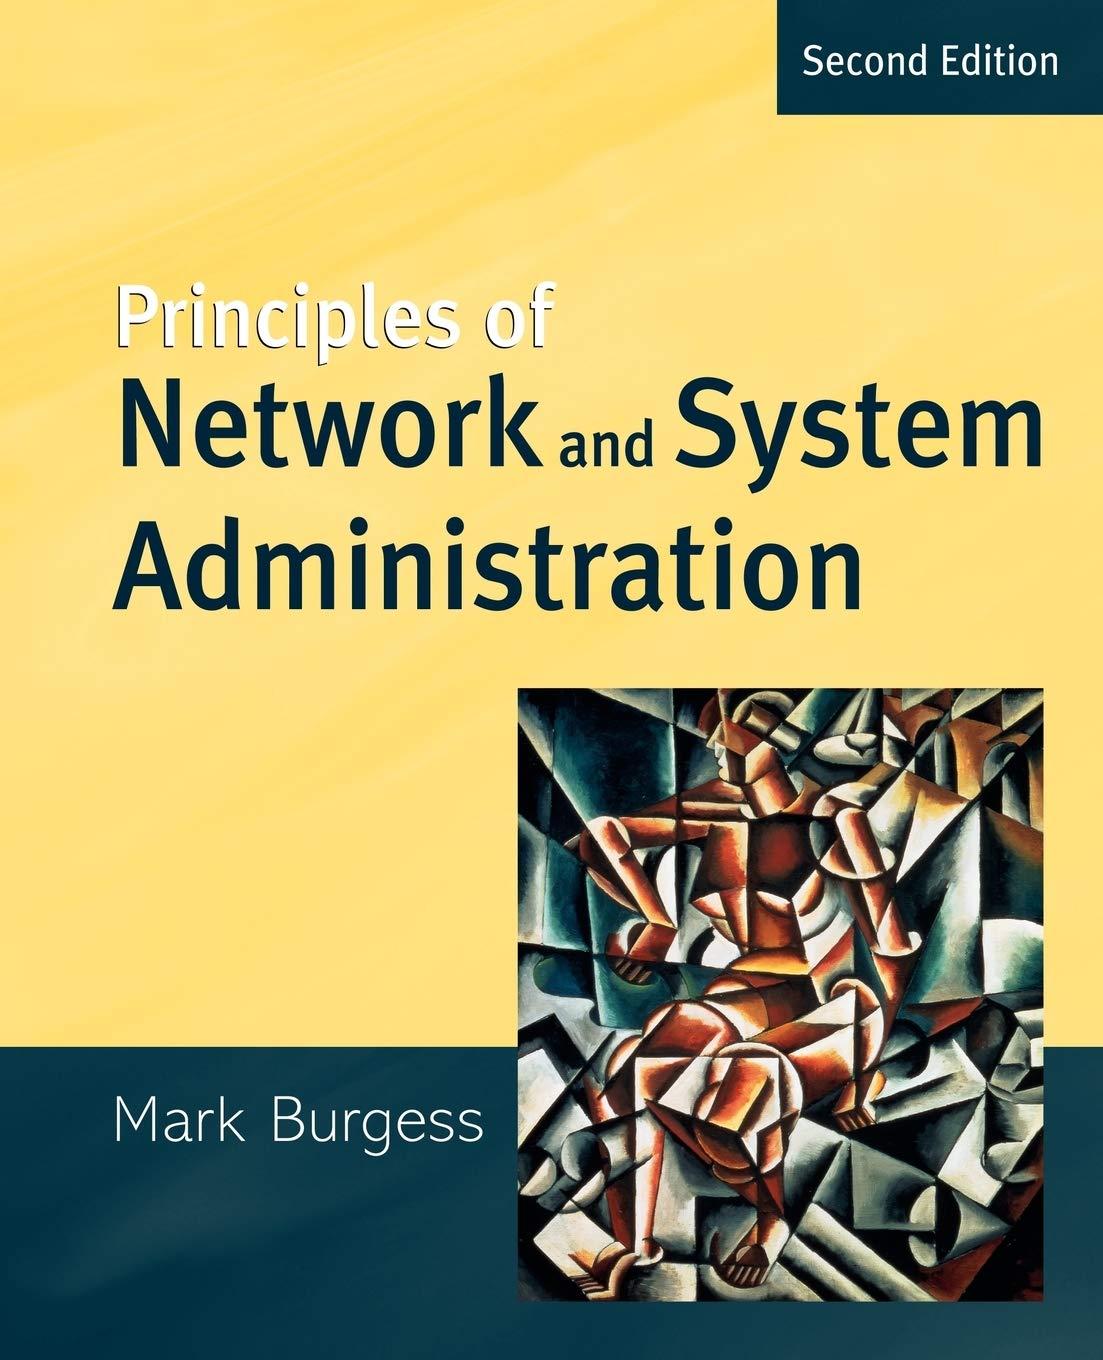 principles of network and system administration 2nd edition mark burgess 8126504986, 978-8126504985